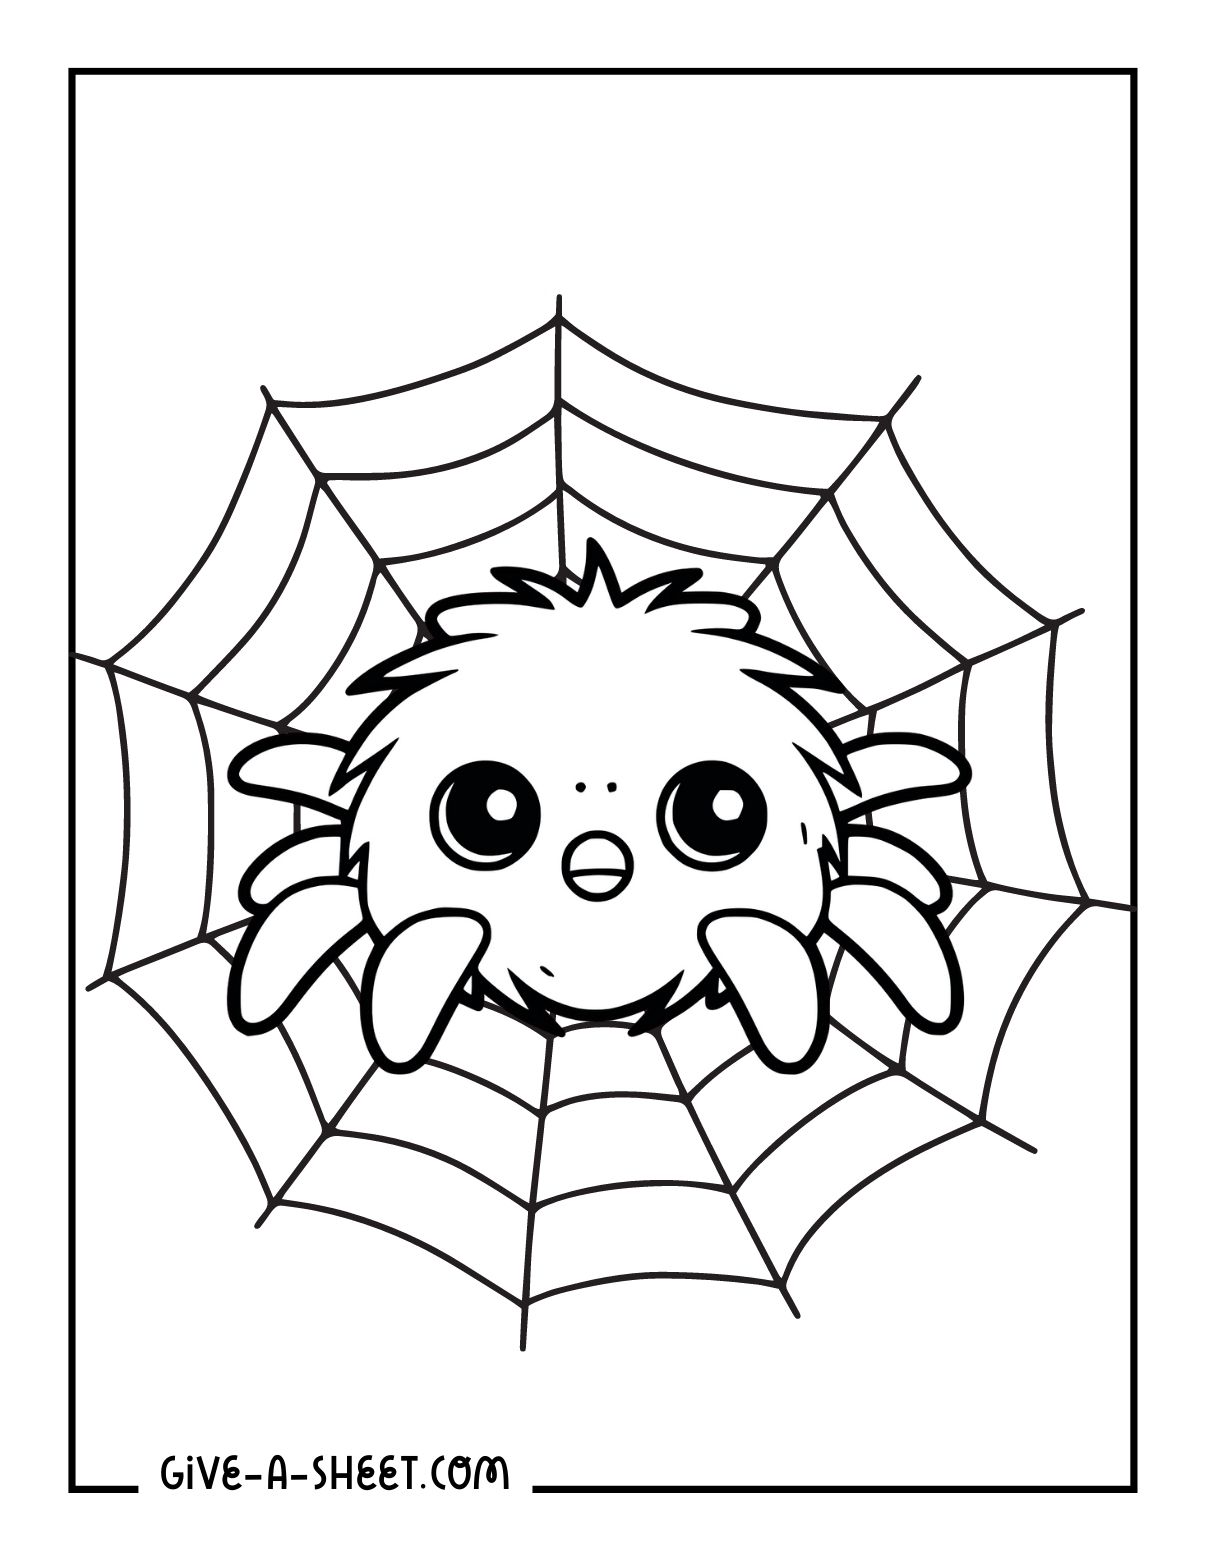 Printable version of the cute baby tarantula coloring page for kids.